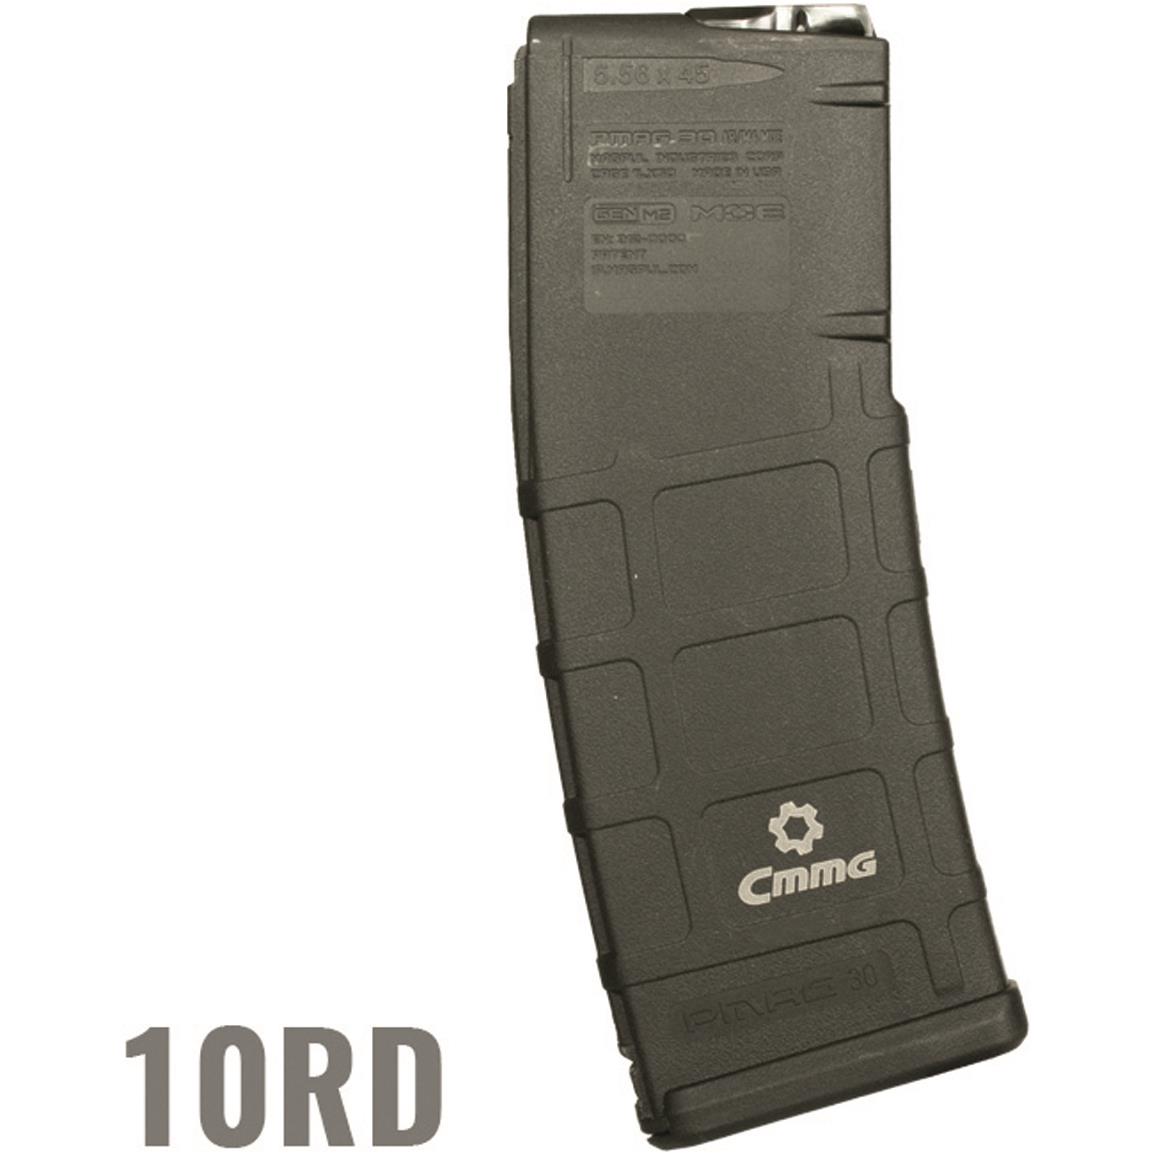 Cmmg 9mm Ar Conversion Magazine 10 Rounds 721012 Rifle Mags At